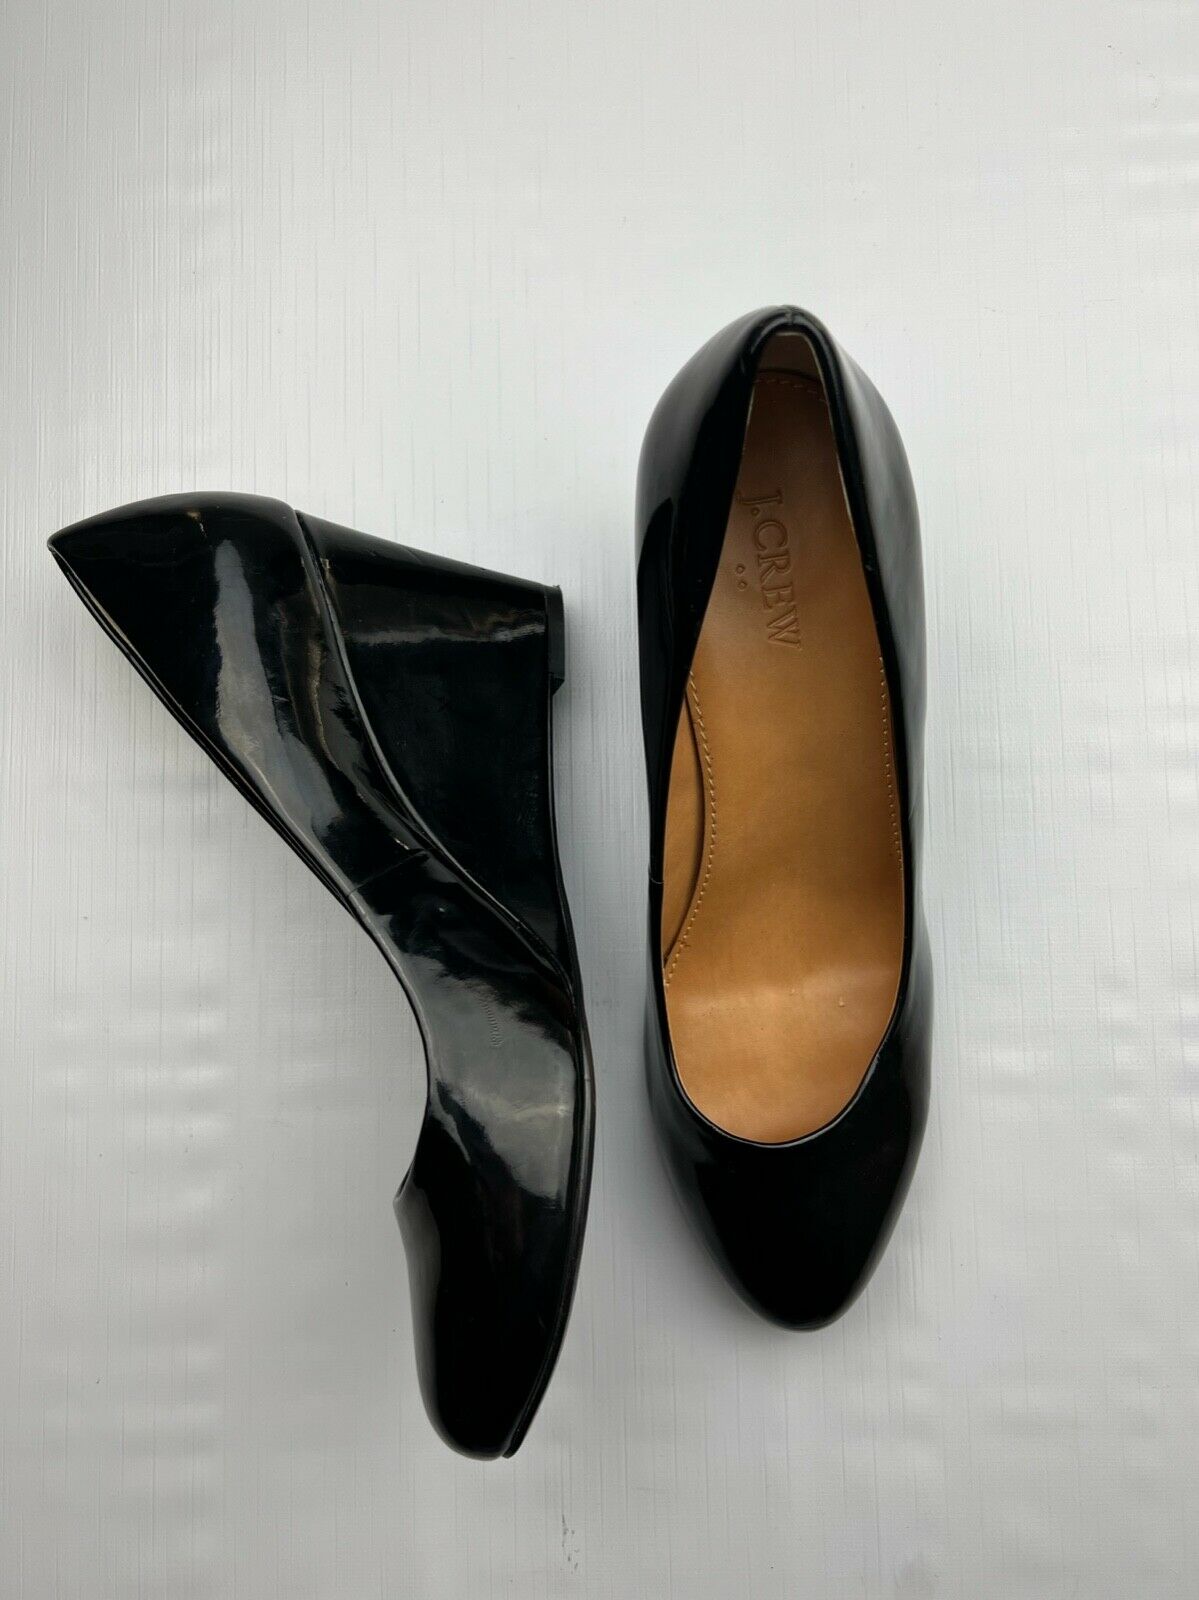 J. Crew Shoes Womens 9 Slip On Wedge Heel Pumps Black Patent Leather Round Toe